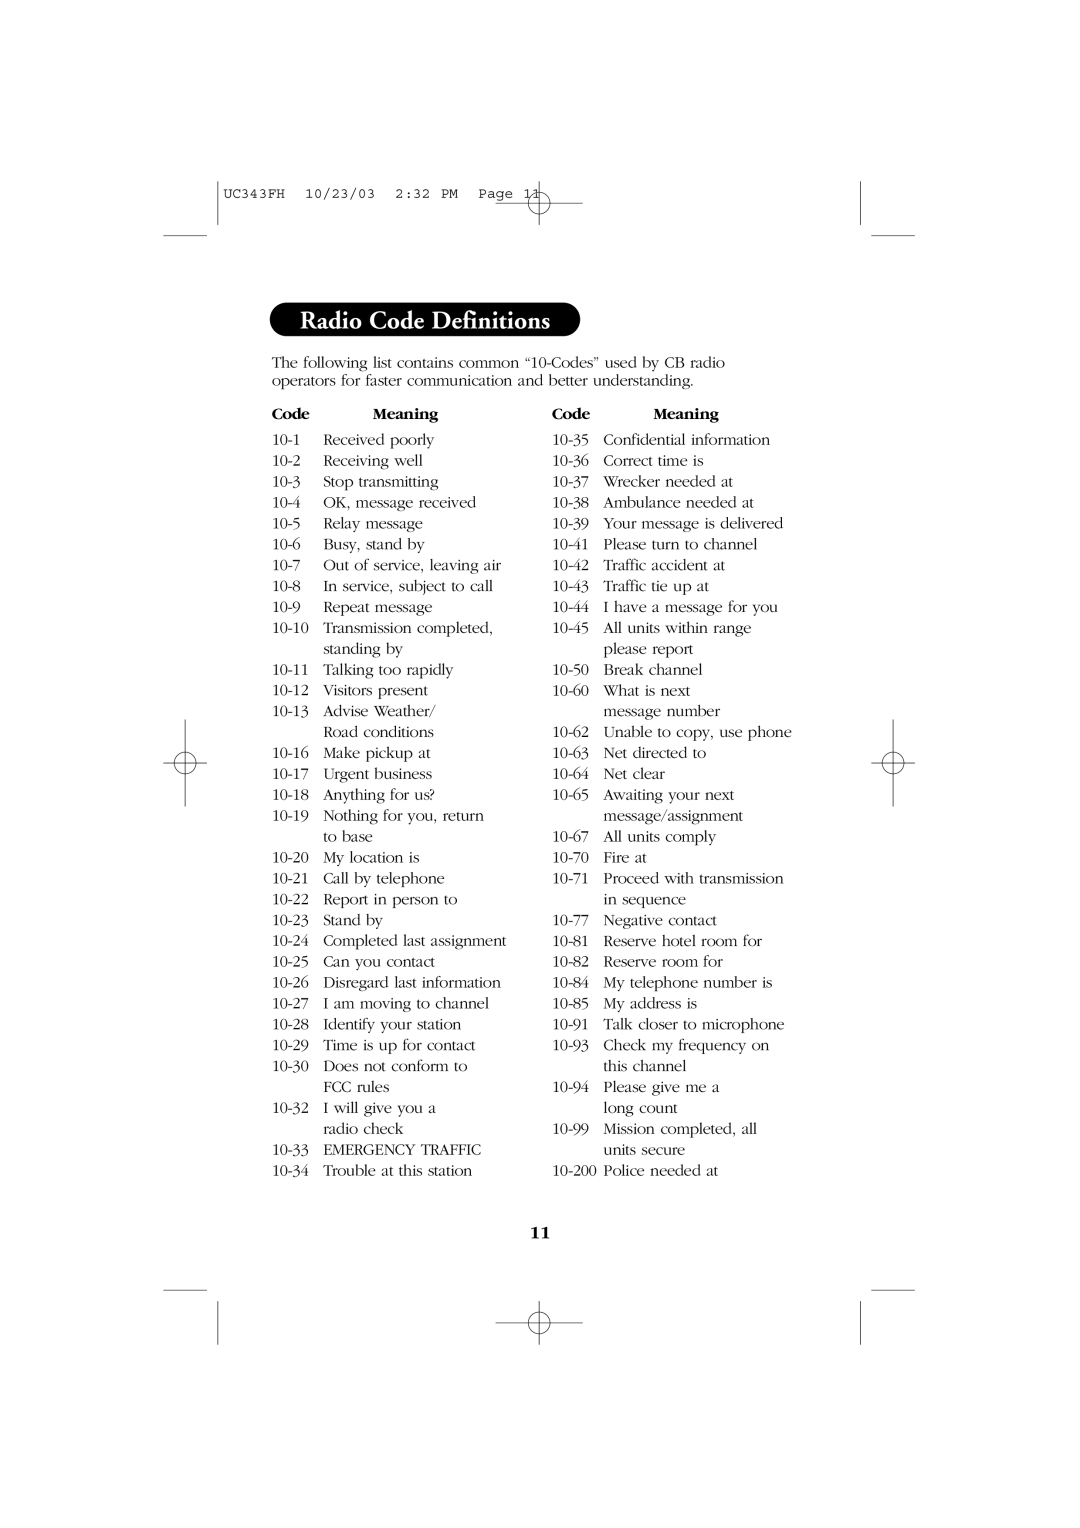 Uniden PC78 manual Radio Code Definitions, Meaning 